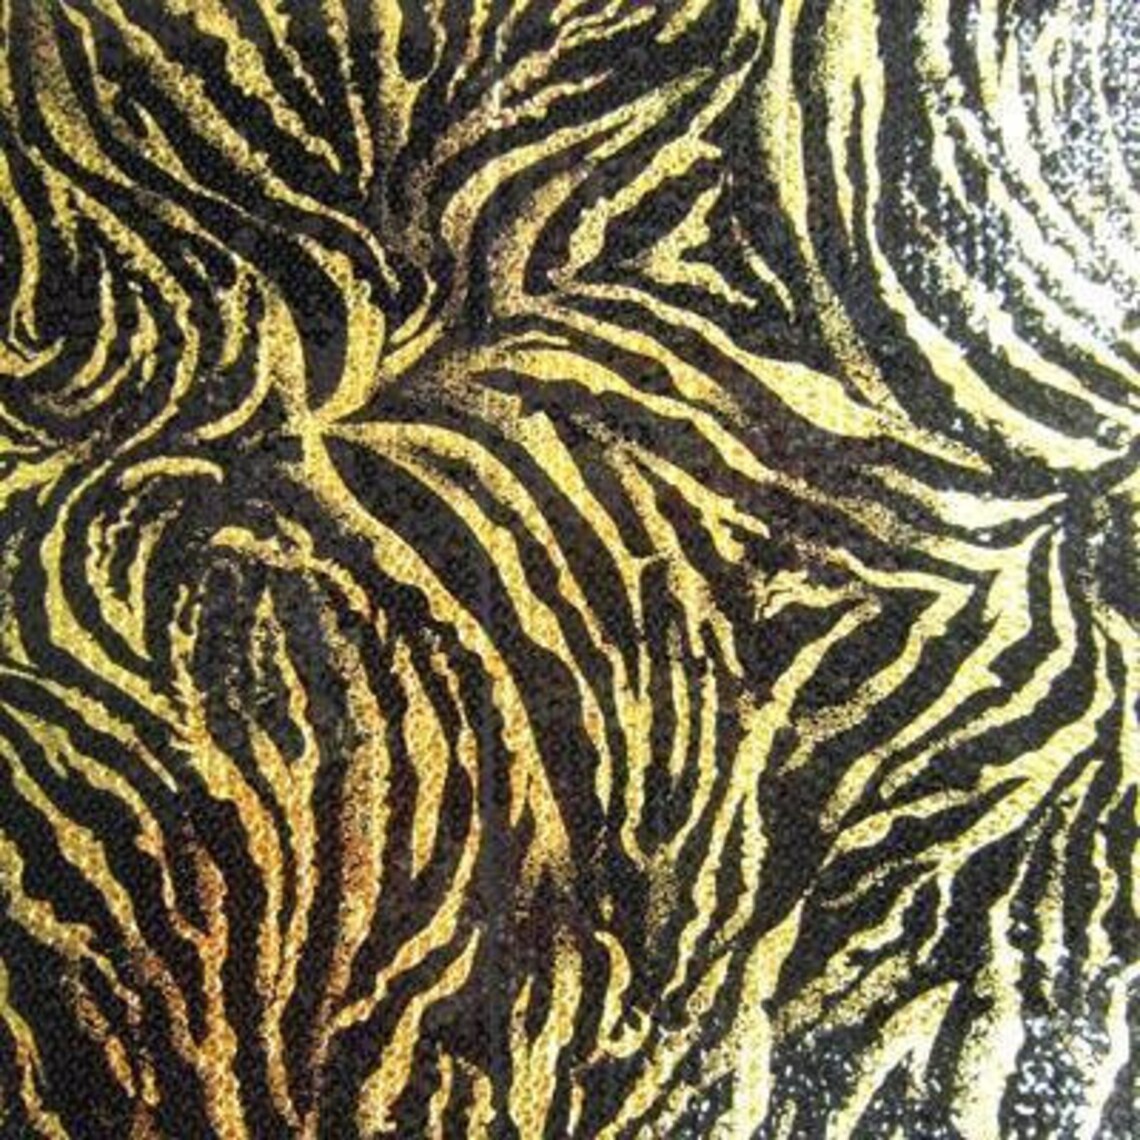 Two-tone Tiger Print 3mm Sequin On Polyester Spandex Stretch | Etsy